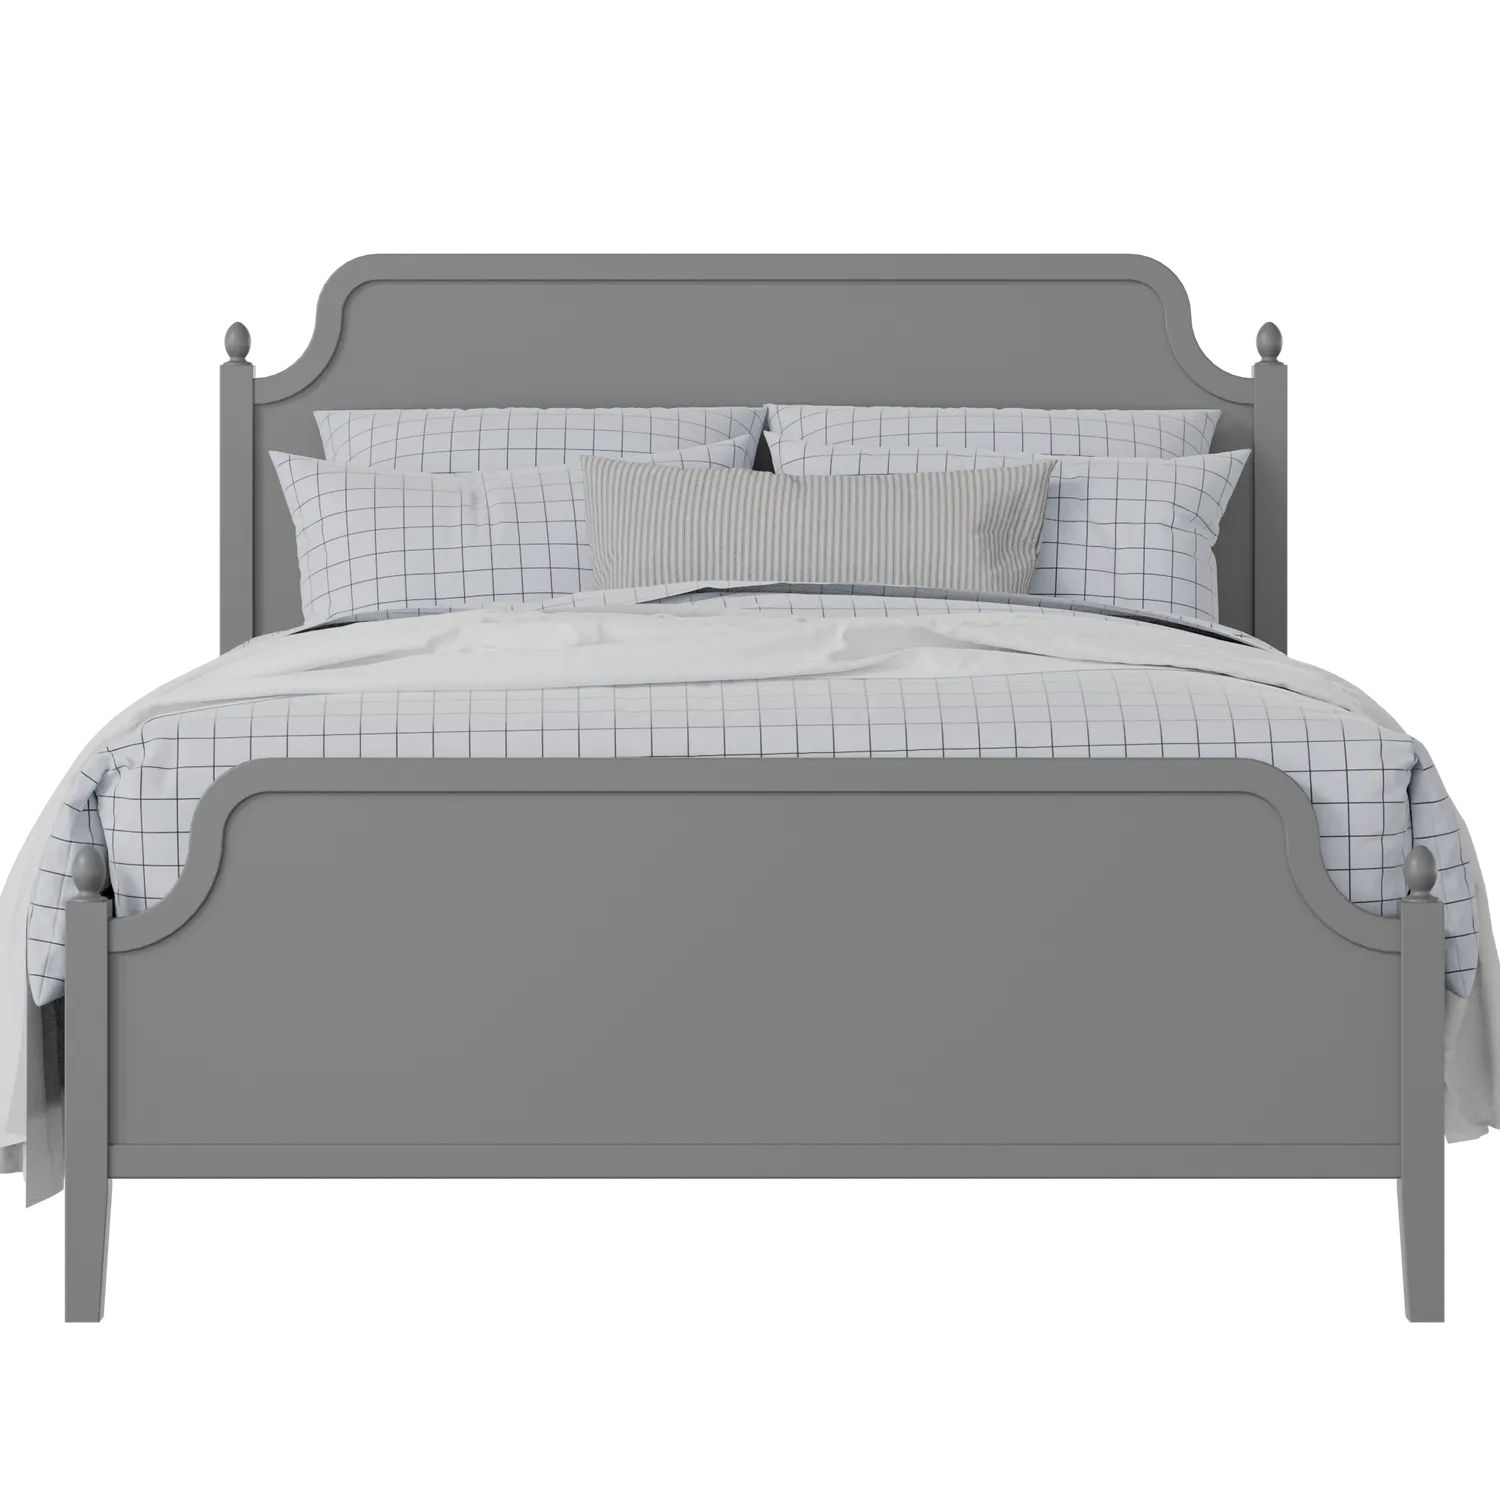 Bronte painted wood bed in grey with Juno mattress